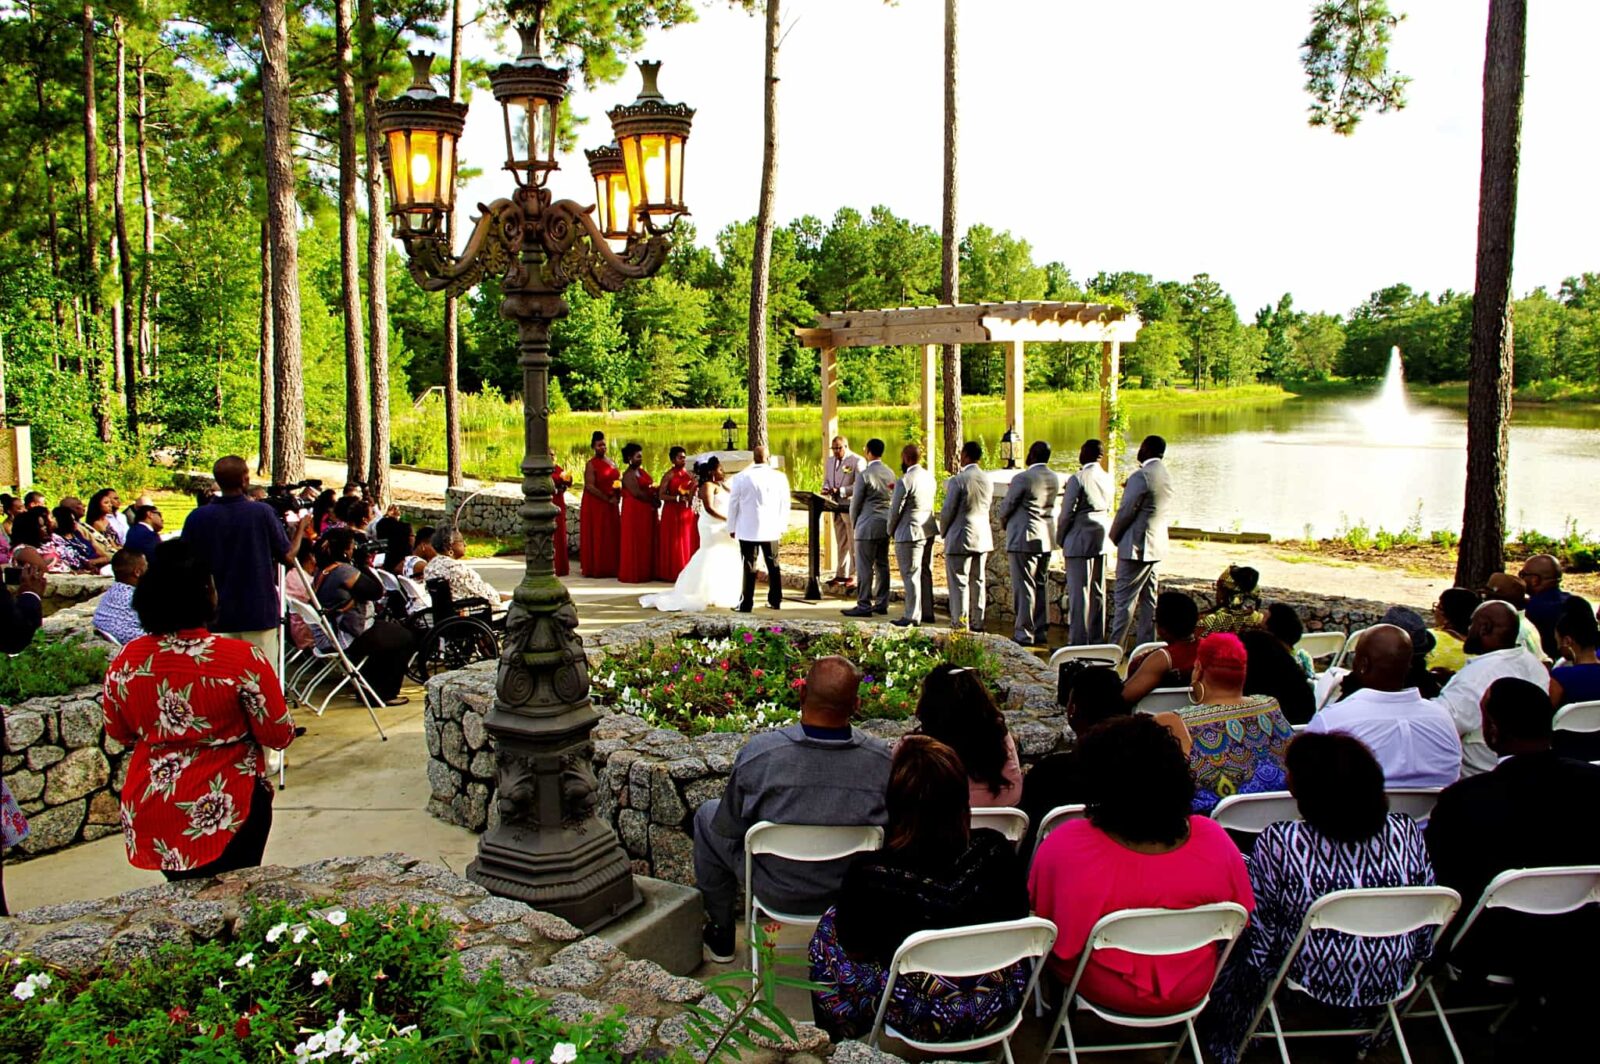 A wedding ceremony with many people sitting in chairs.